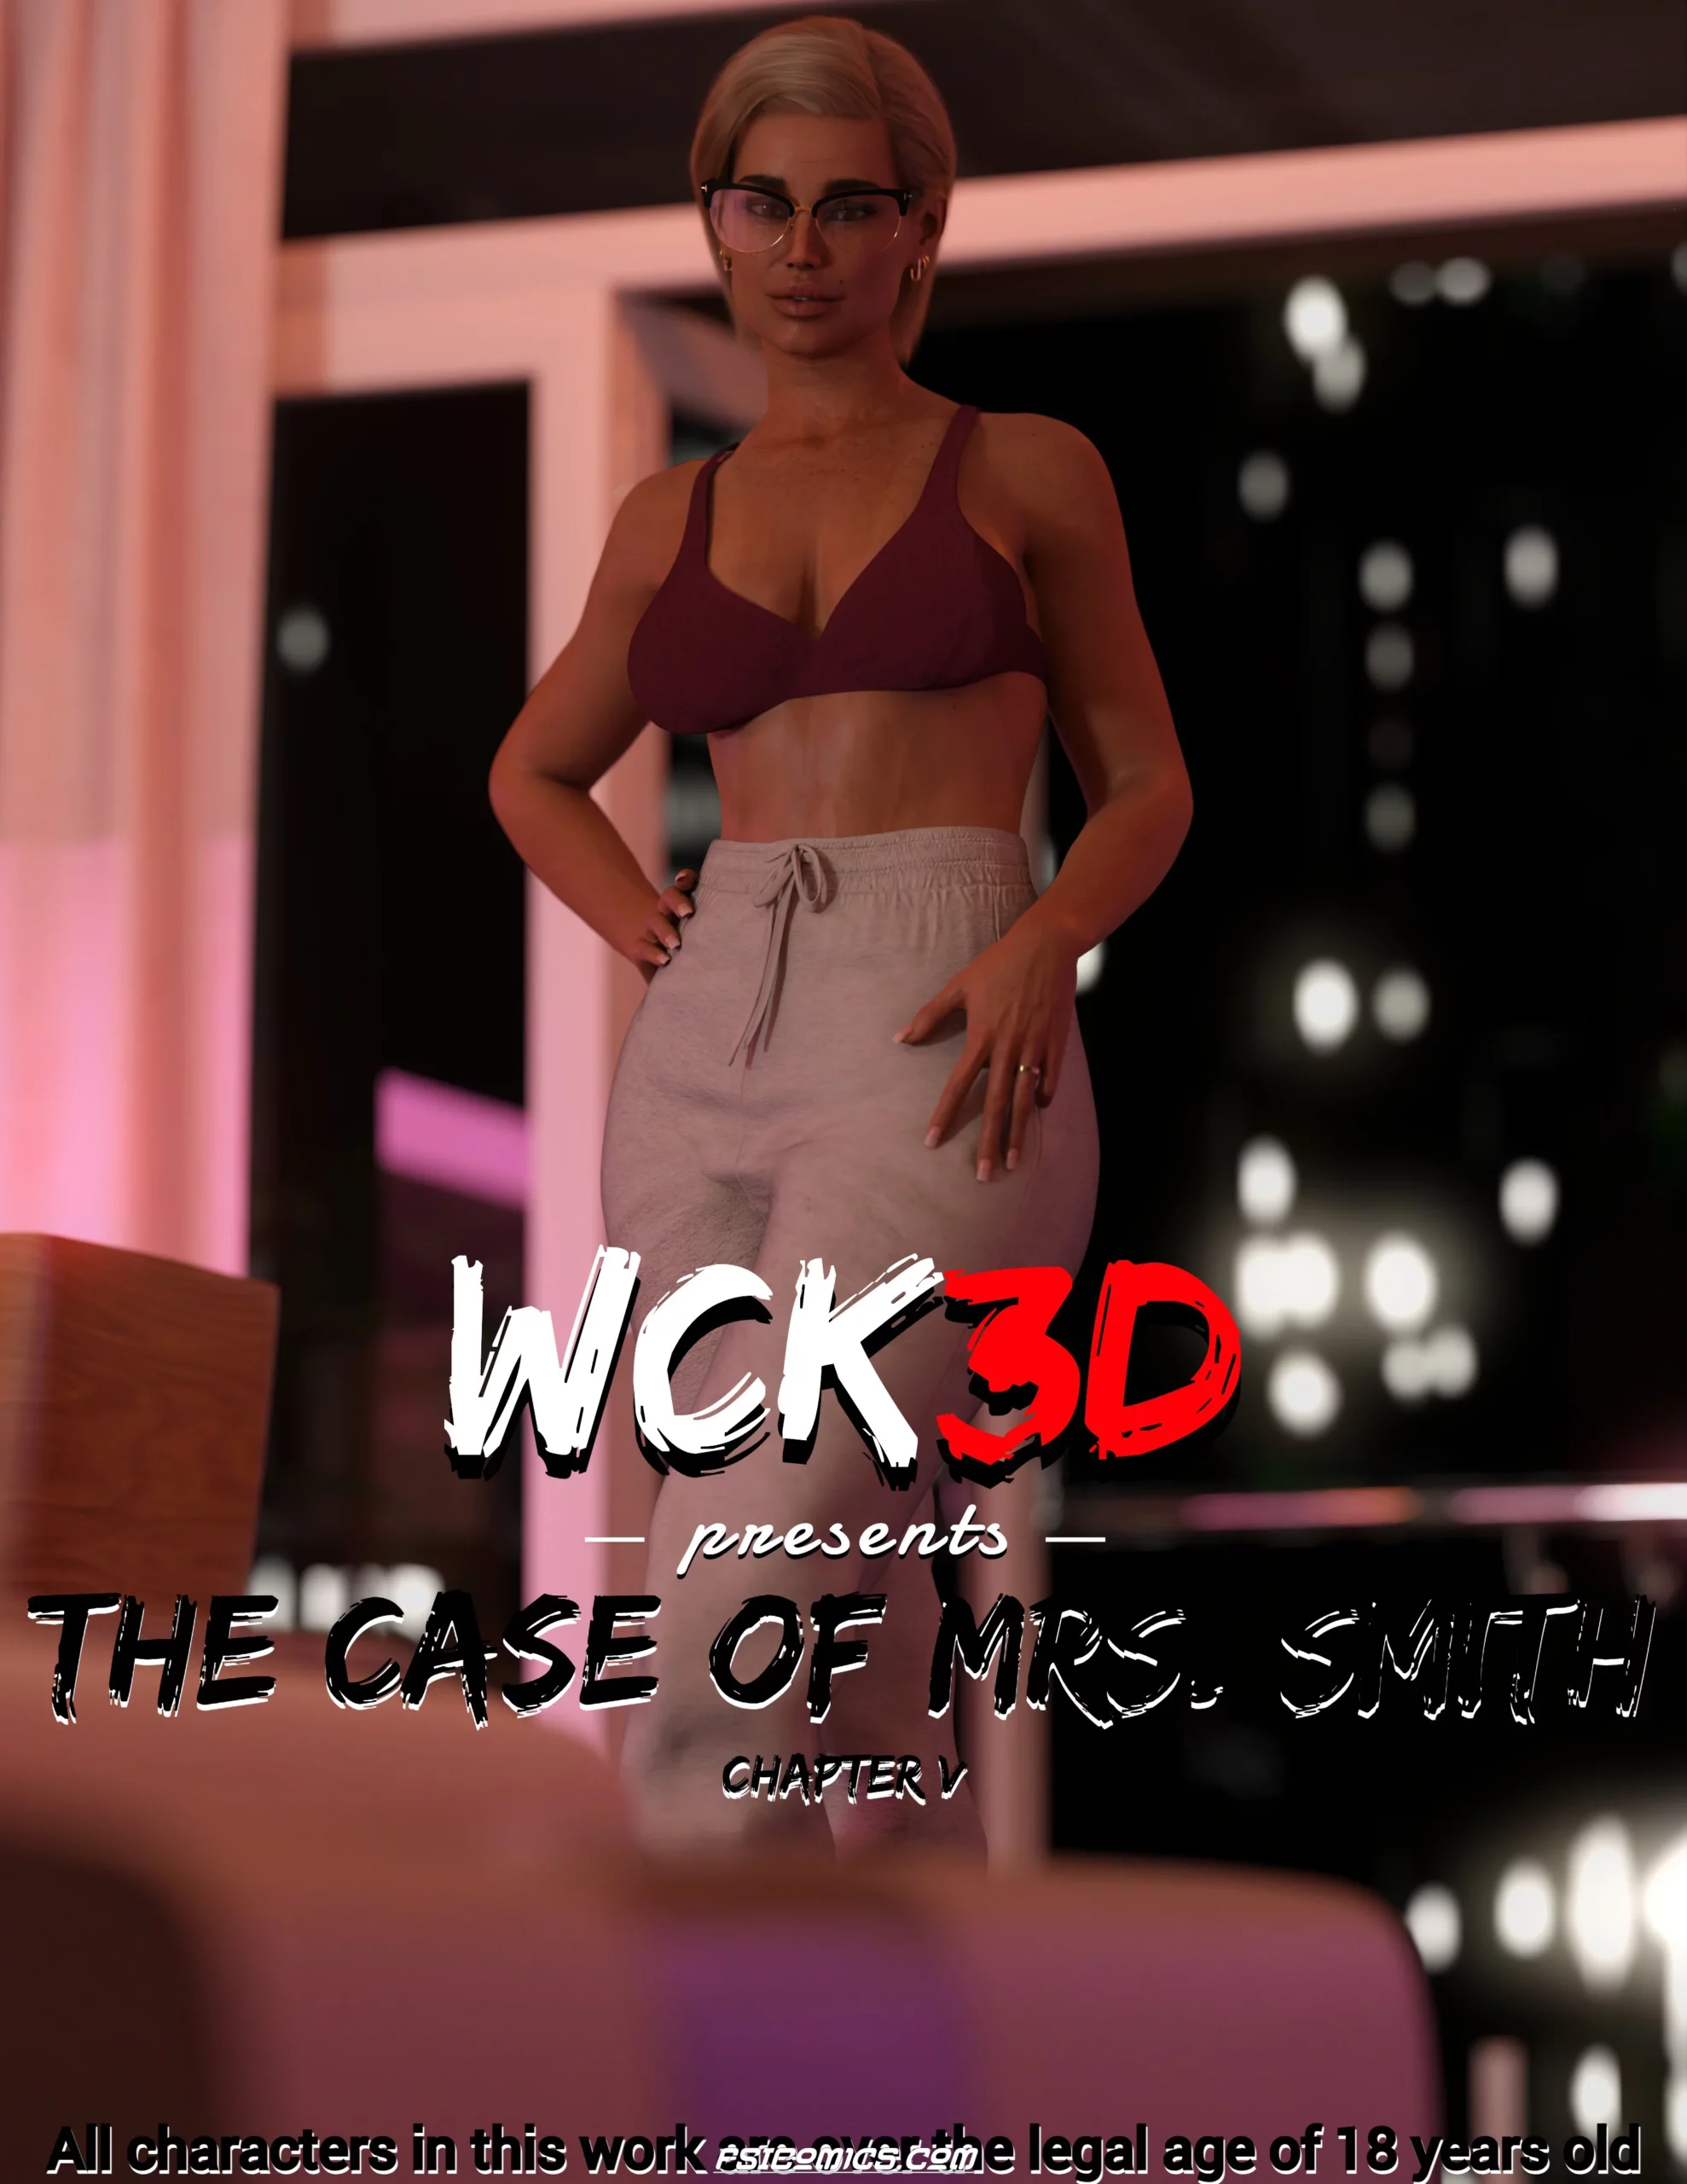 The Case Of Mrs Smith Chapter 5 – WCK3D - 51 - FSIComics